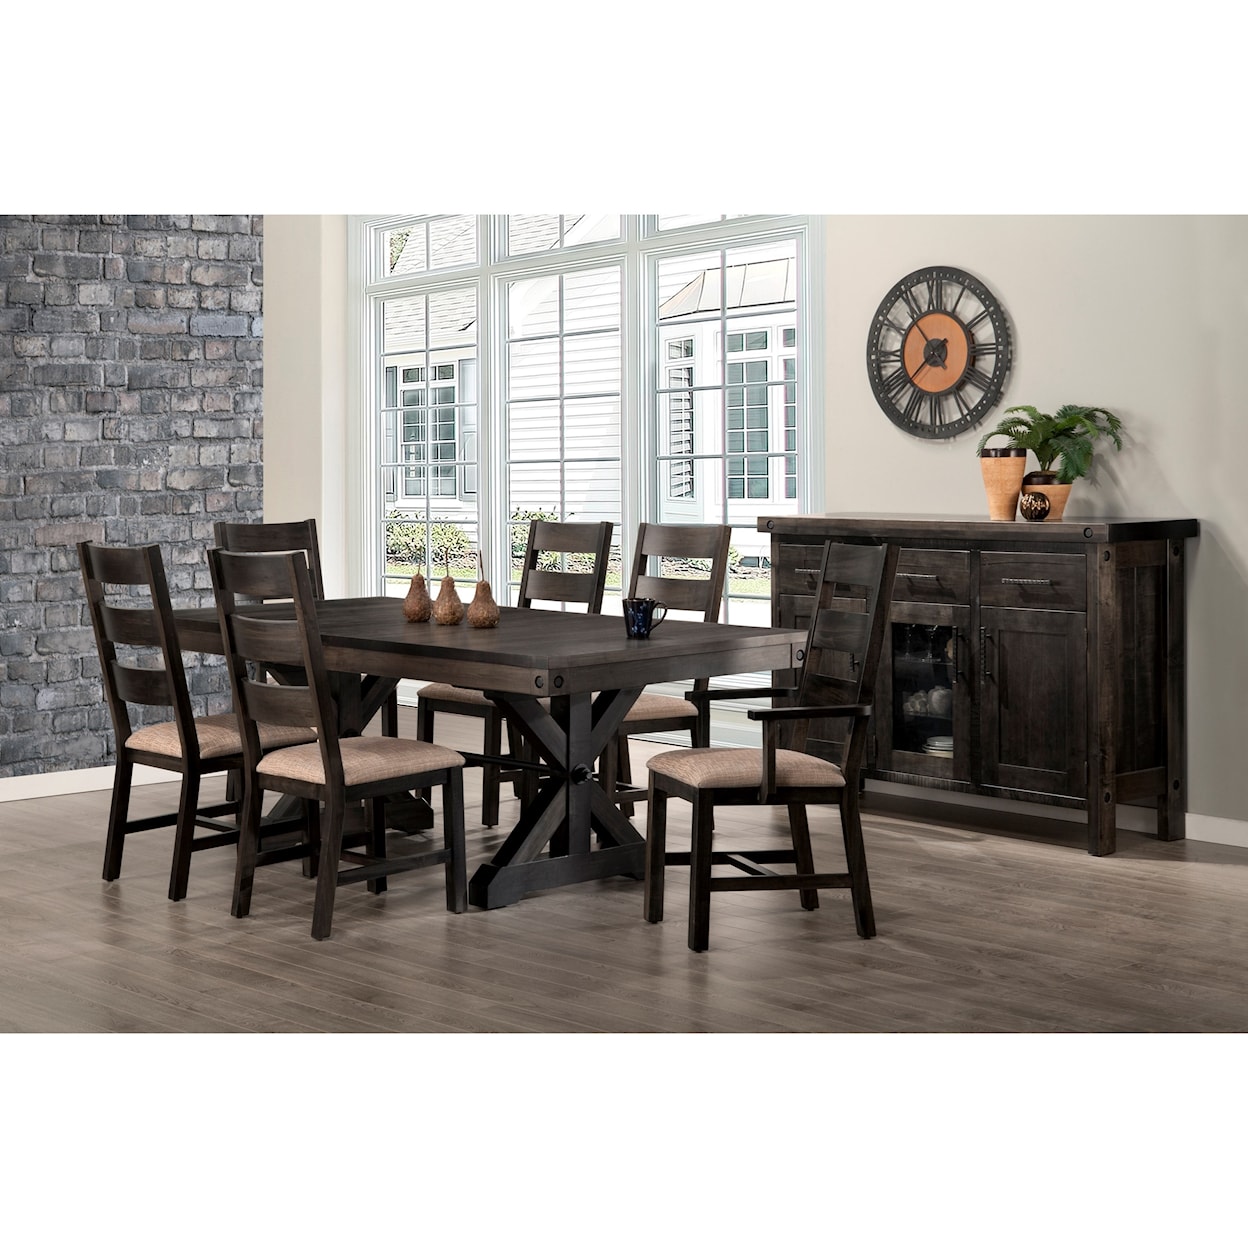 Handstone Rafters Dining Room Group